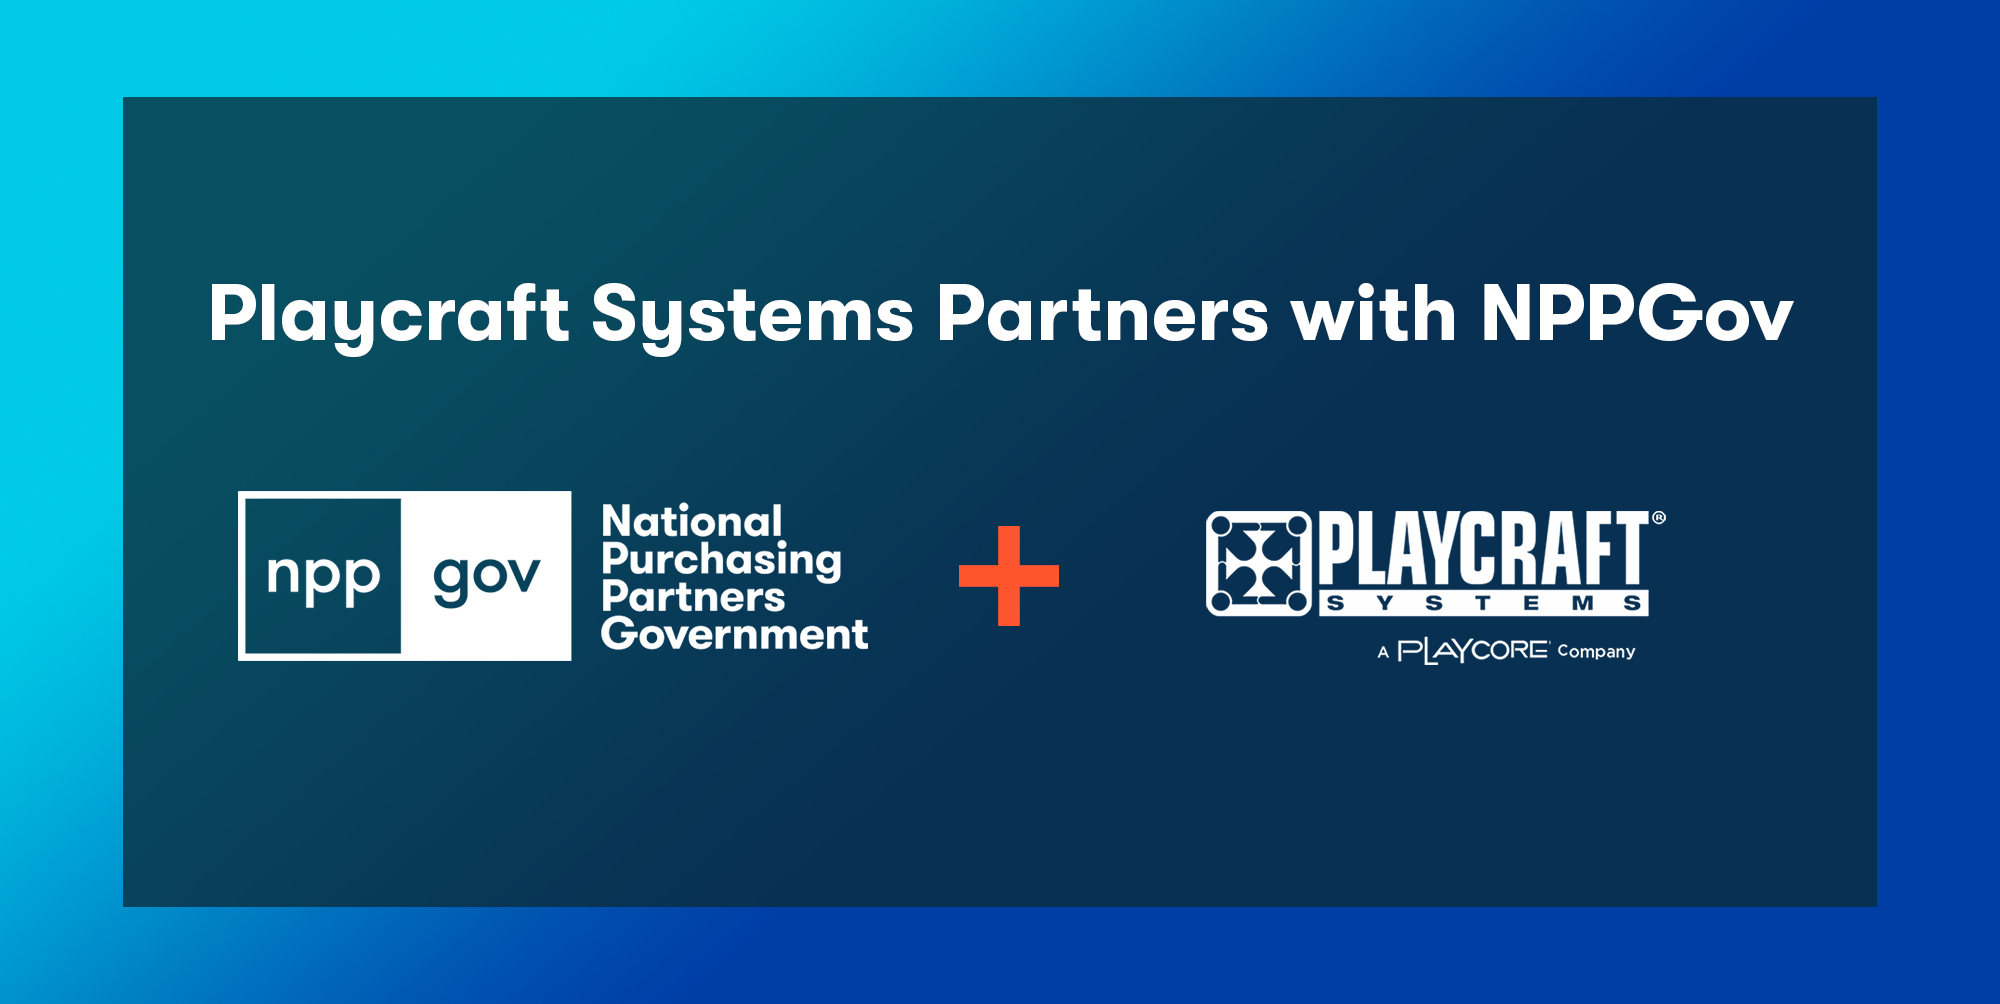 Playcraft Partners with NPPGov